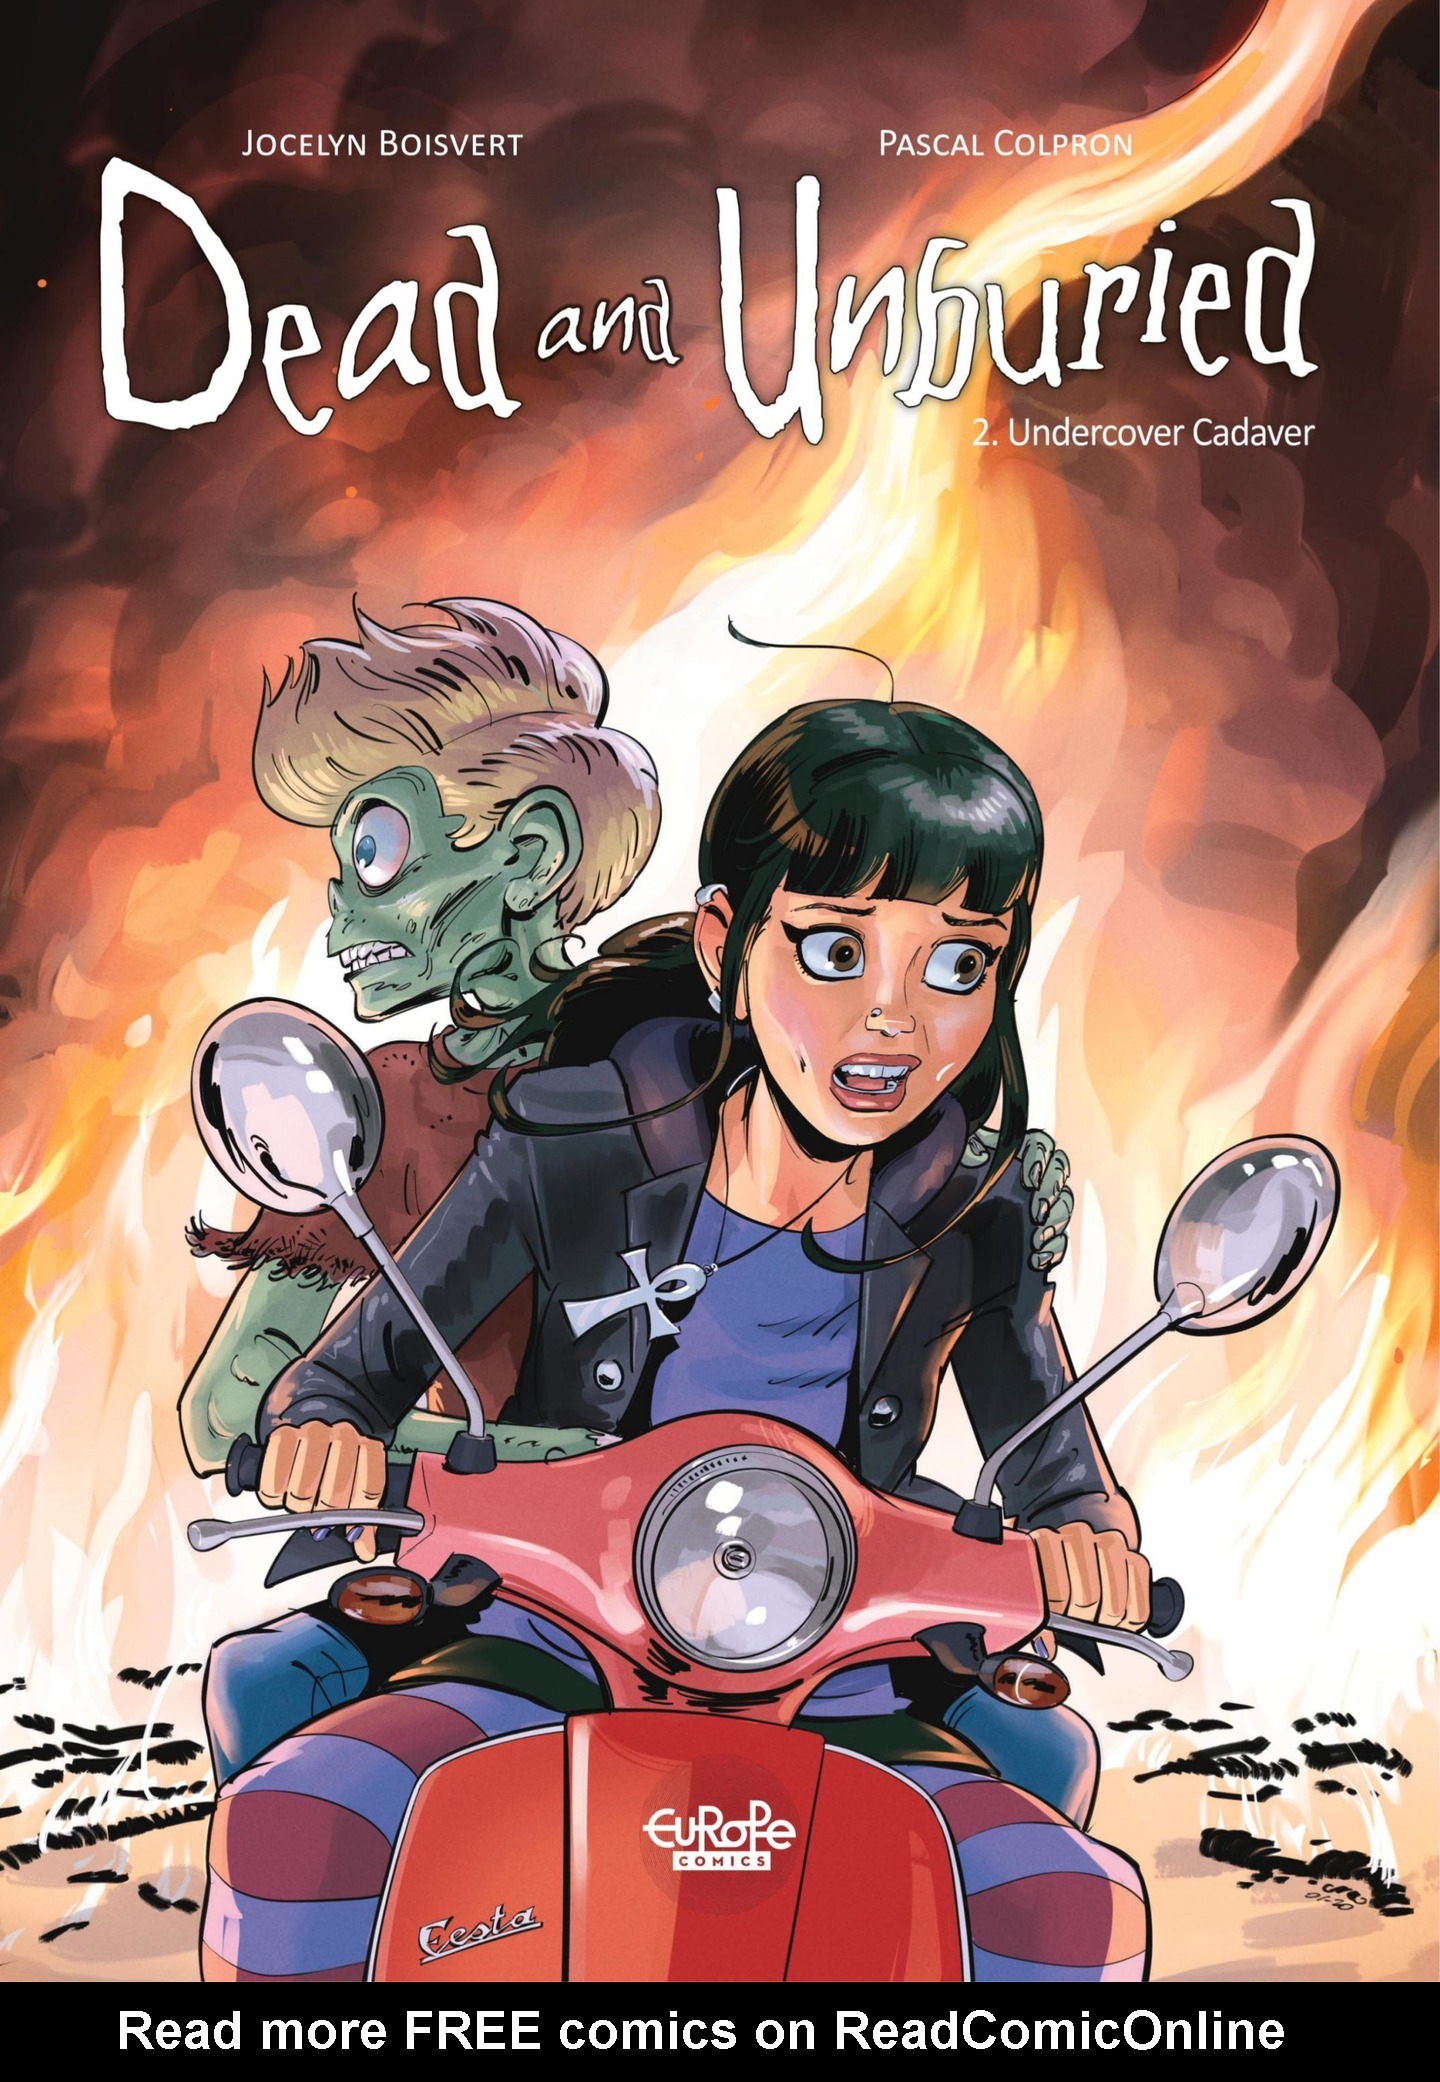 Read online Dead and Unburied comic -  Issue #2 - 1